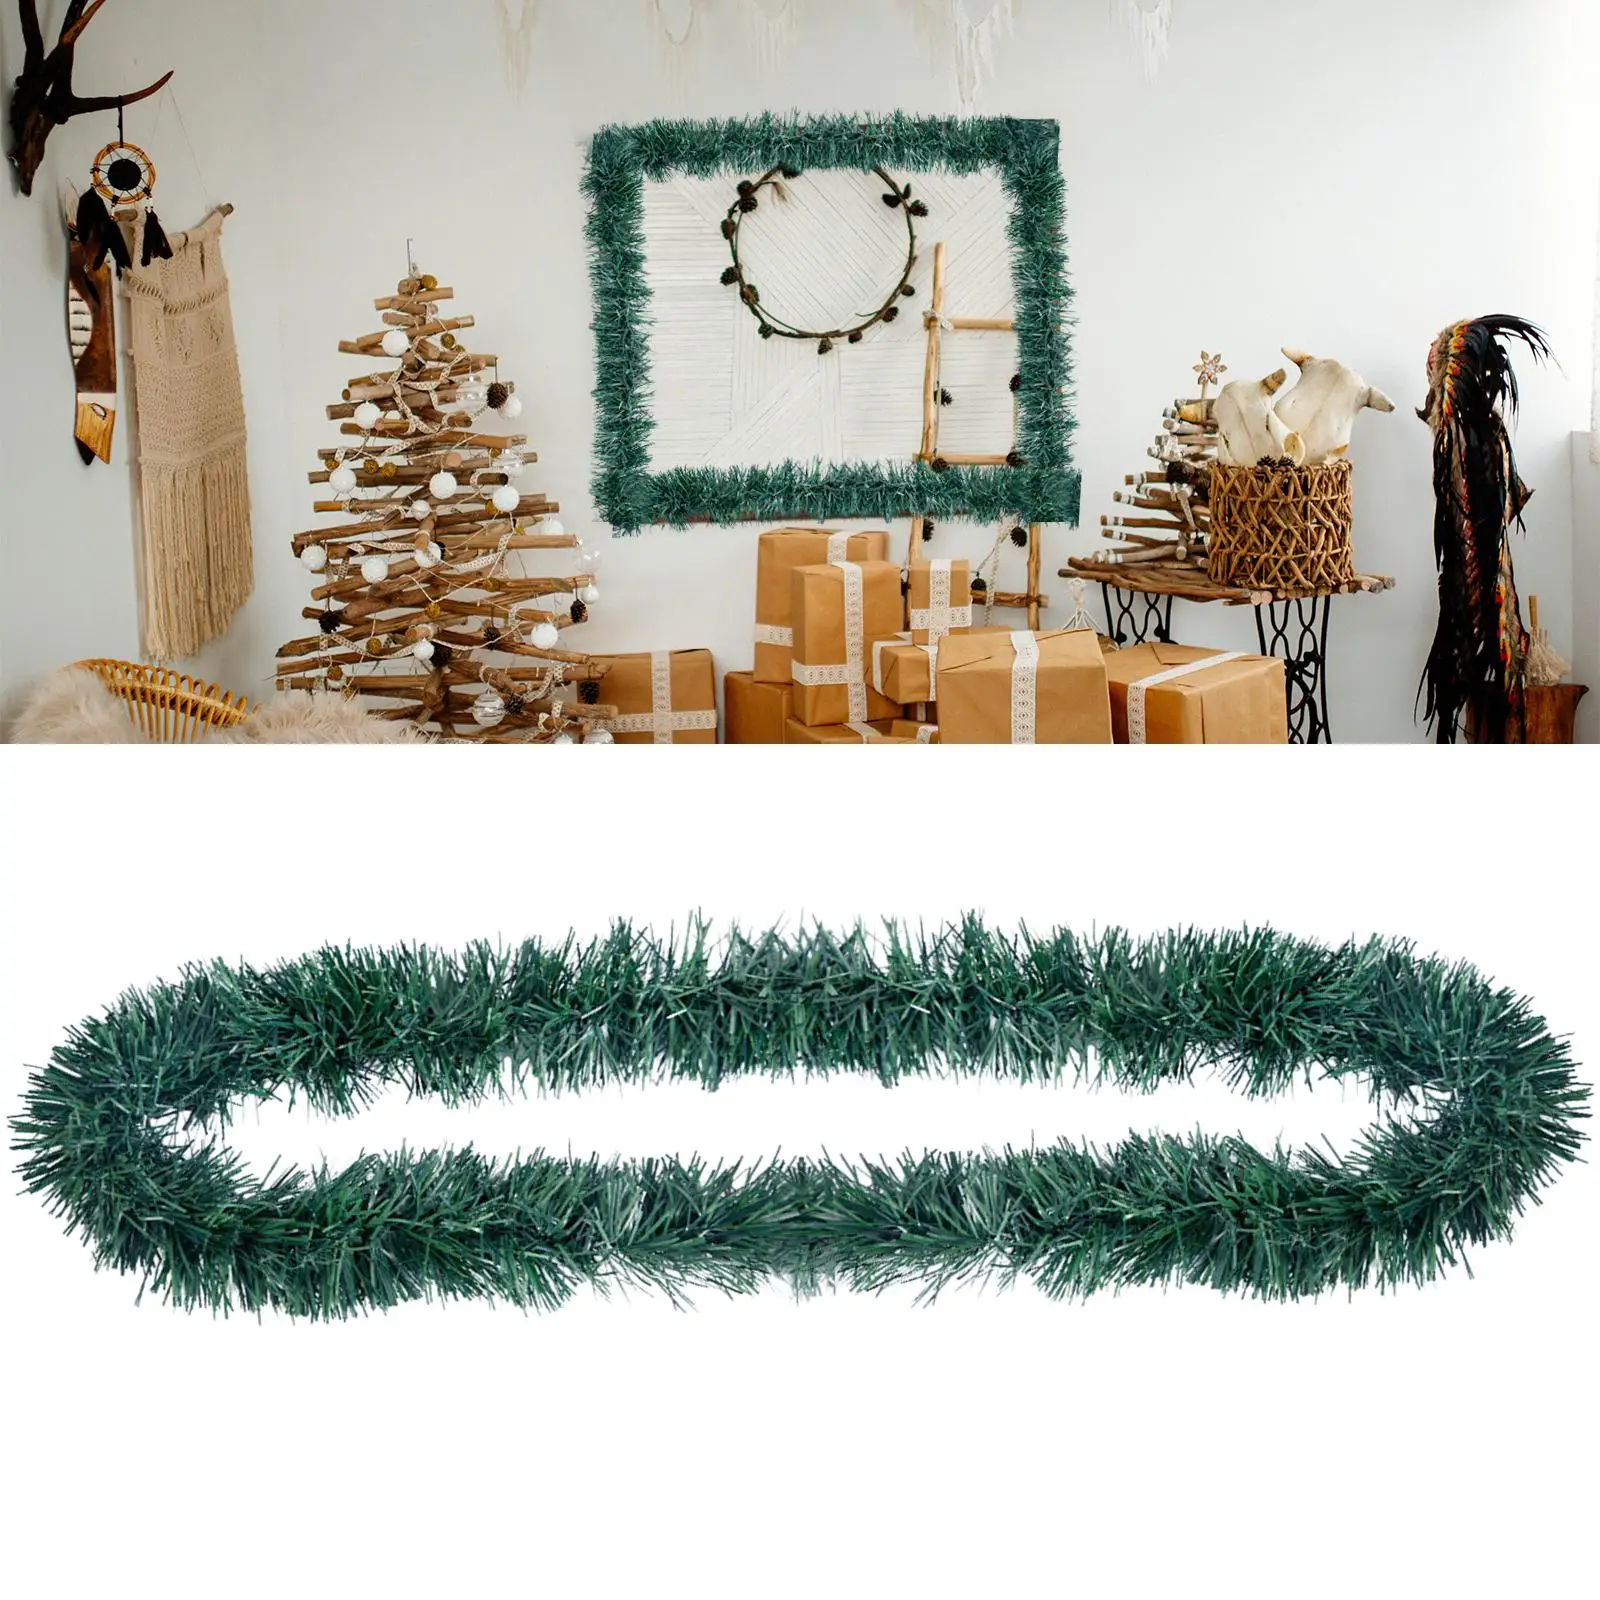 2Pcs Christmas Garland Christmas Collection Holiday Party Decor Green for Winter Holiday Windows Wall Mantel Fireplace Garden